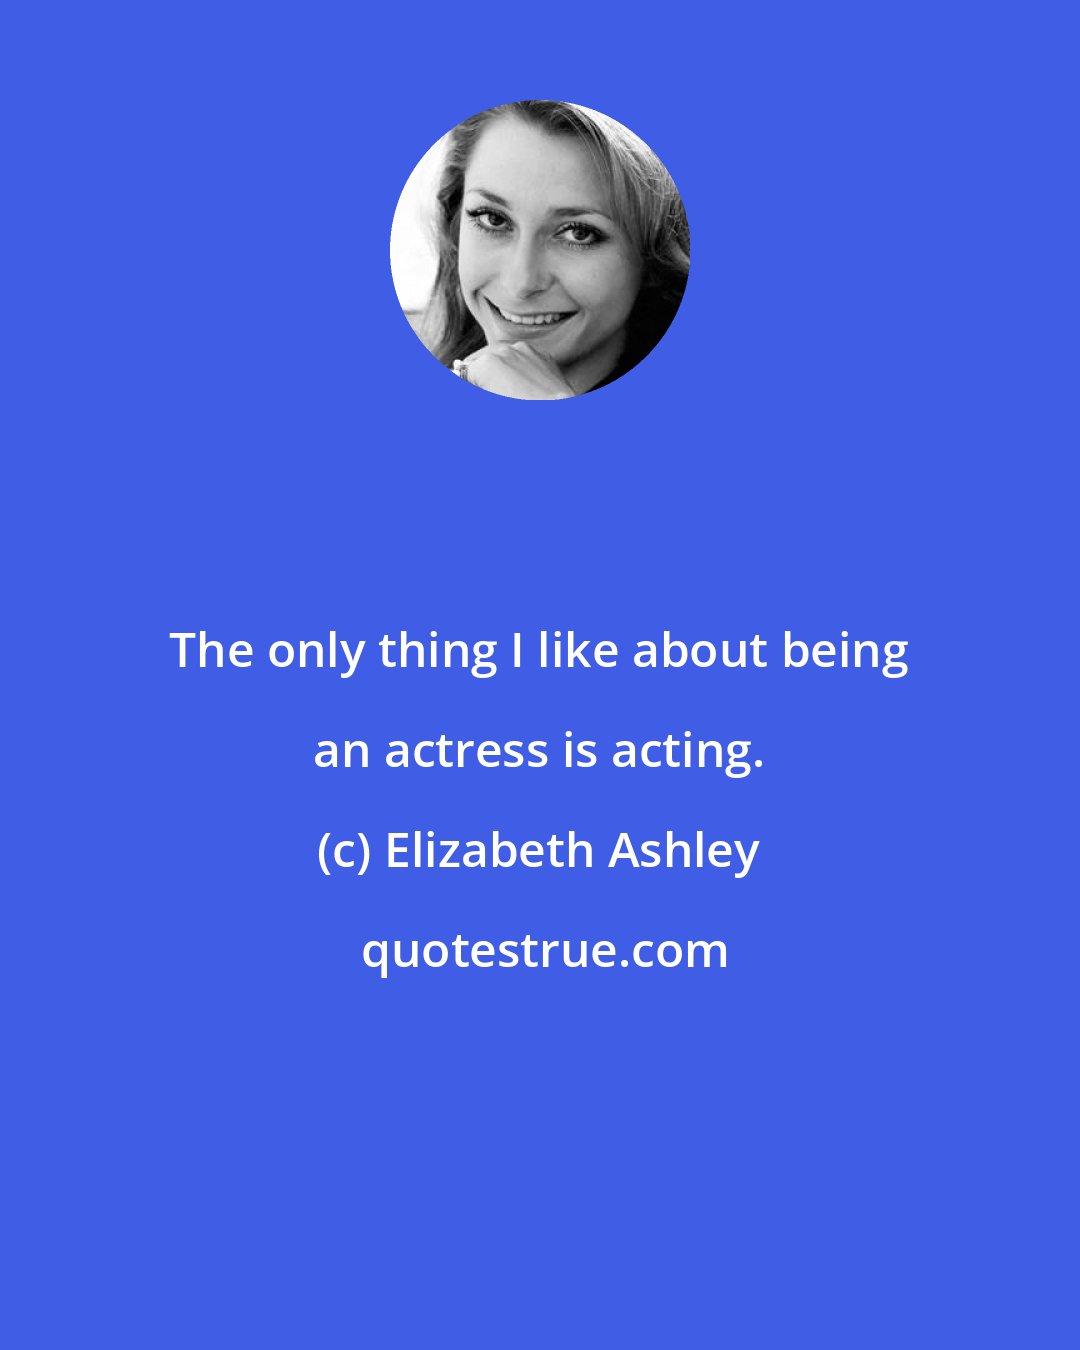 Elizabeth Ashley: The only thing I like about being an actress is acting.